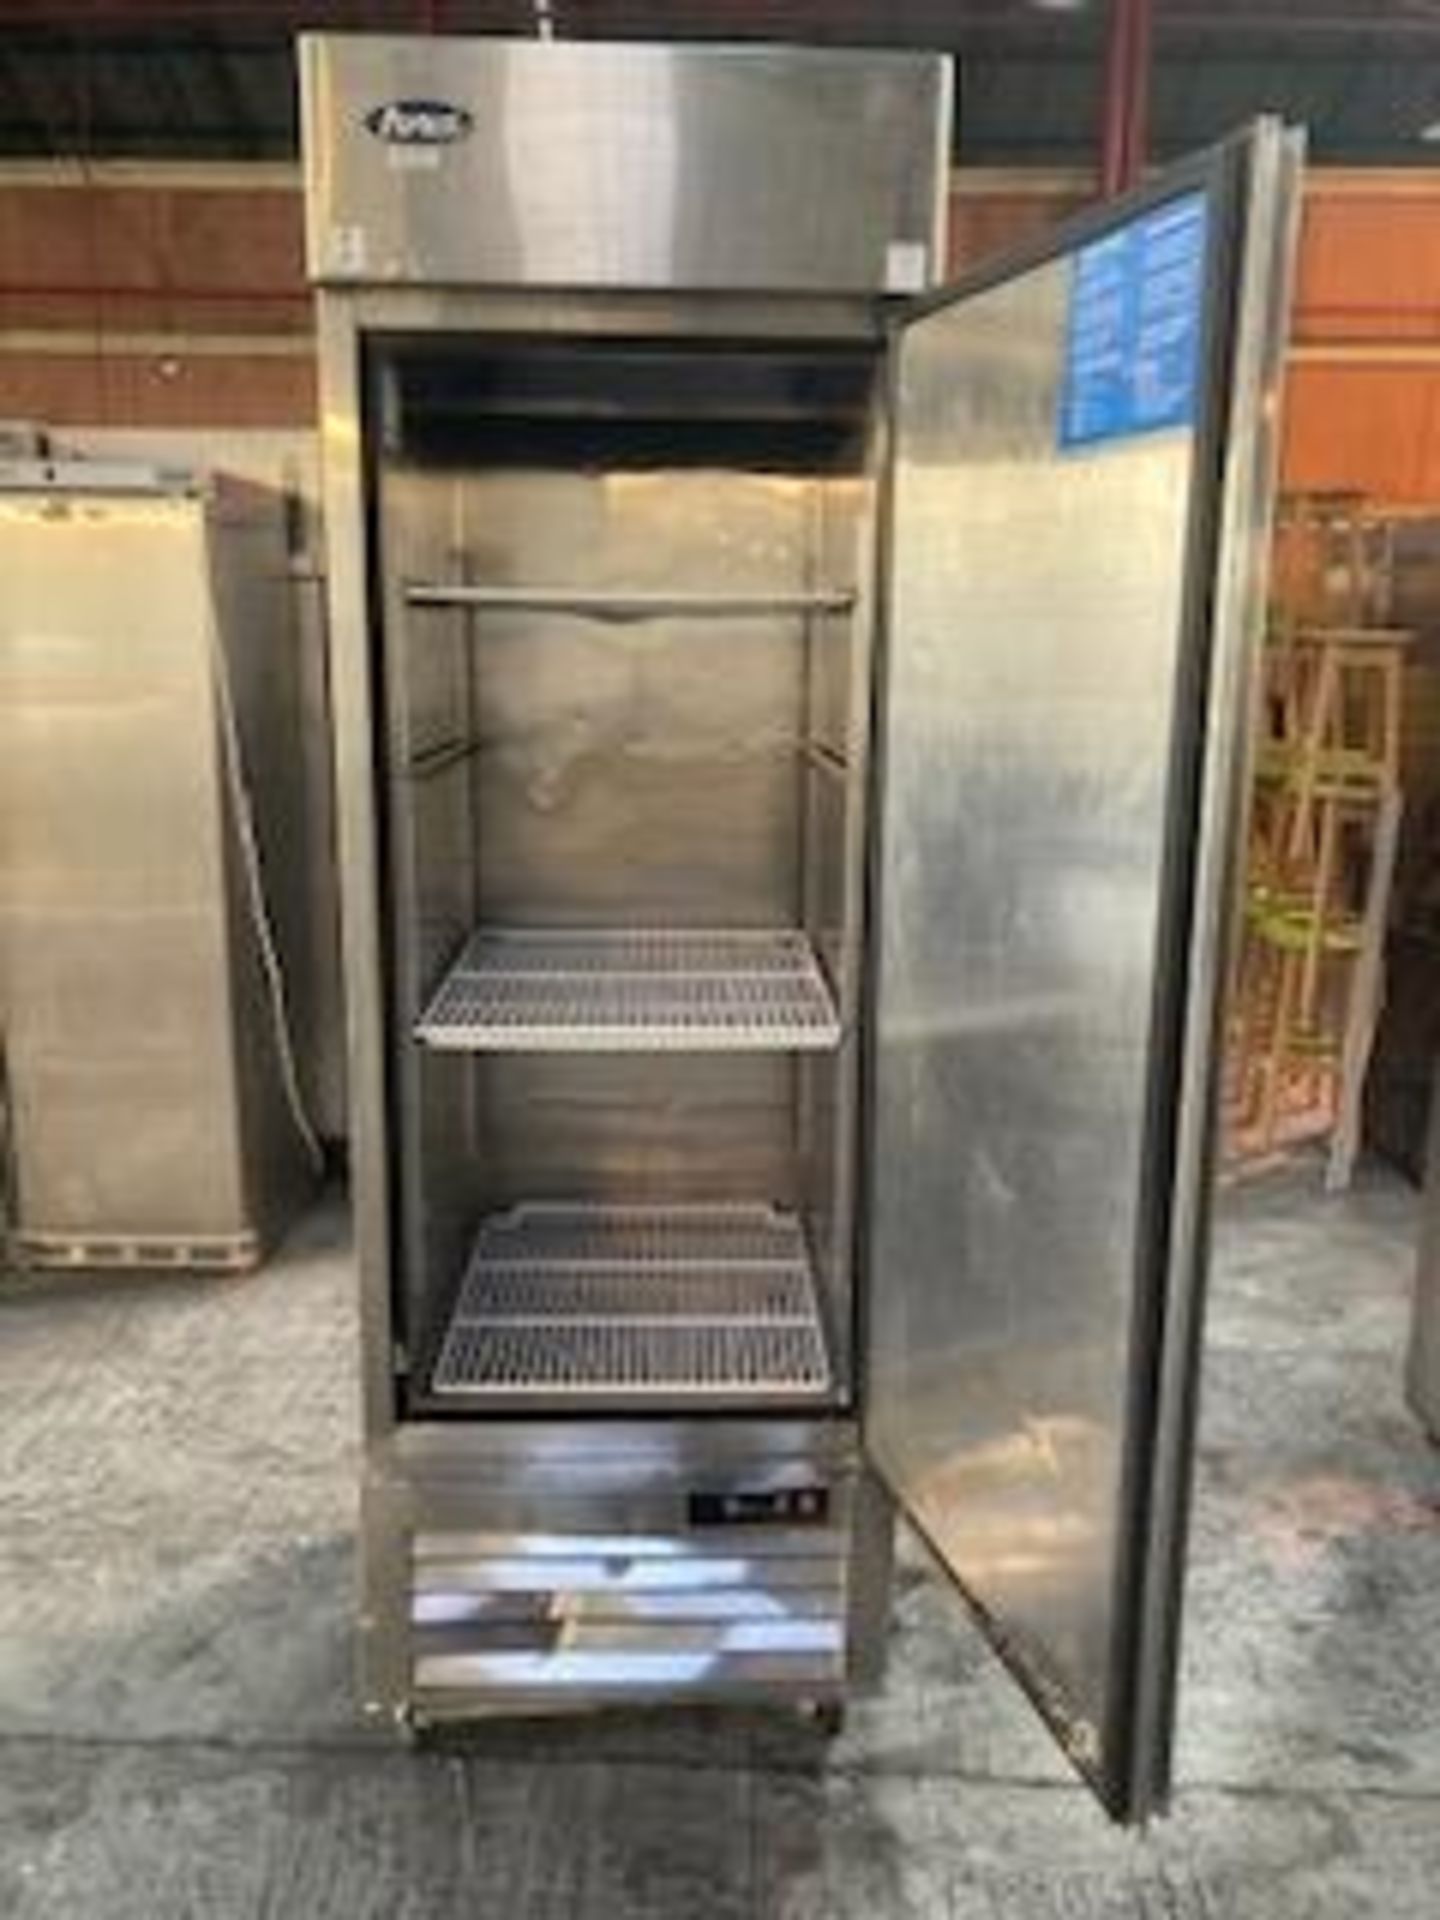 Atosa MBL8951 Single Door Upright Stainless Steel 610 Ltr Freezer - Image 5 of 6